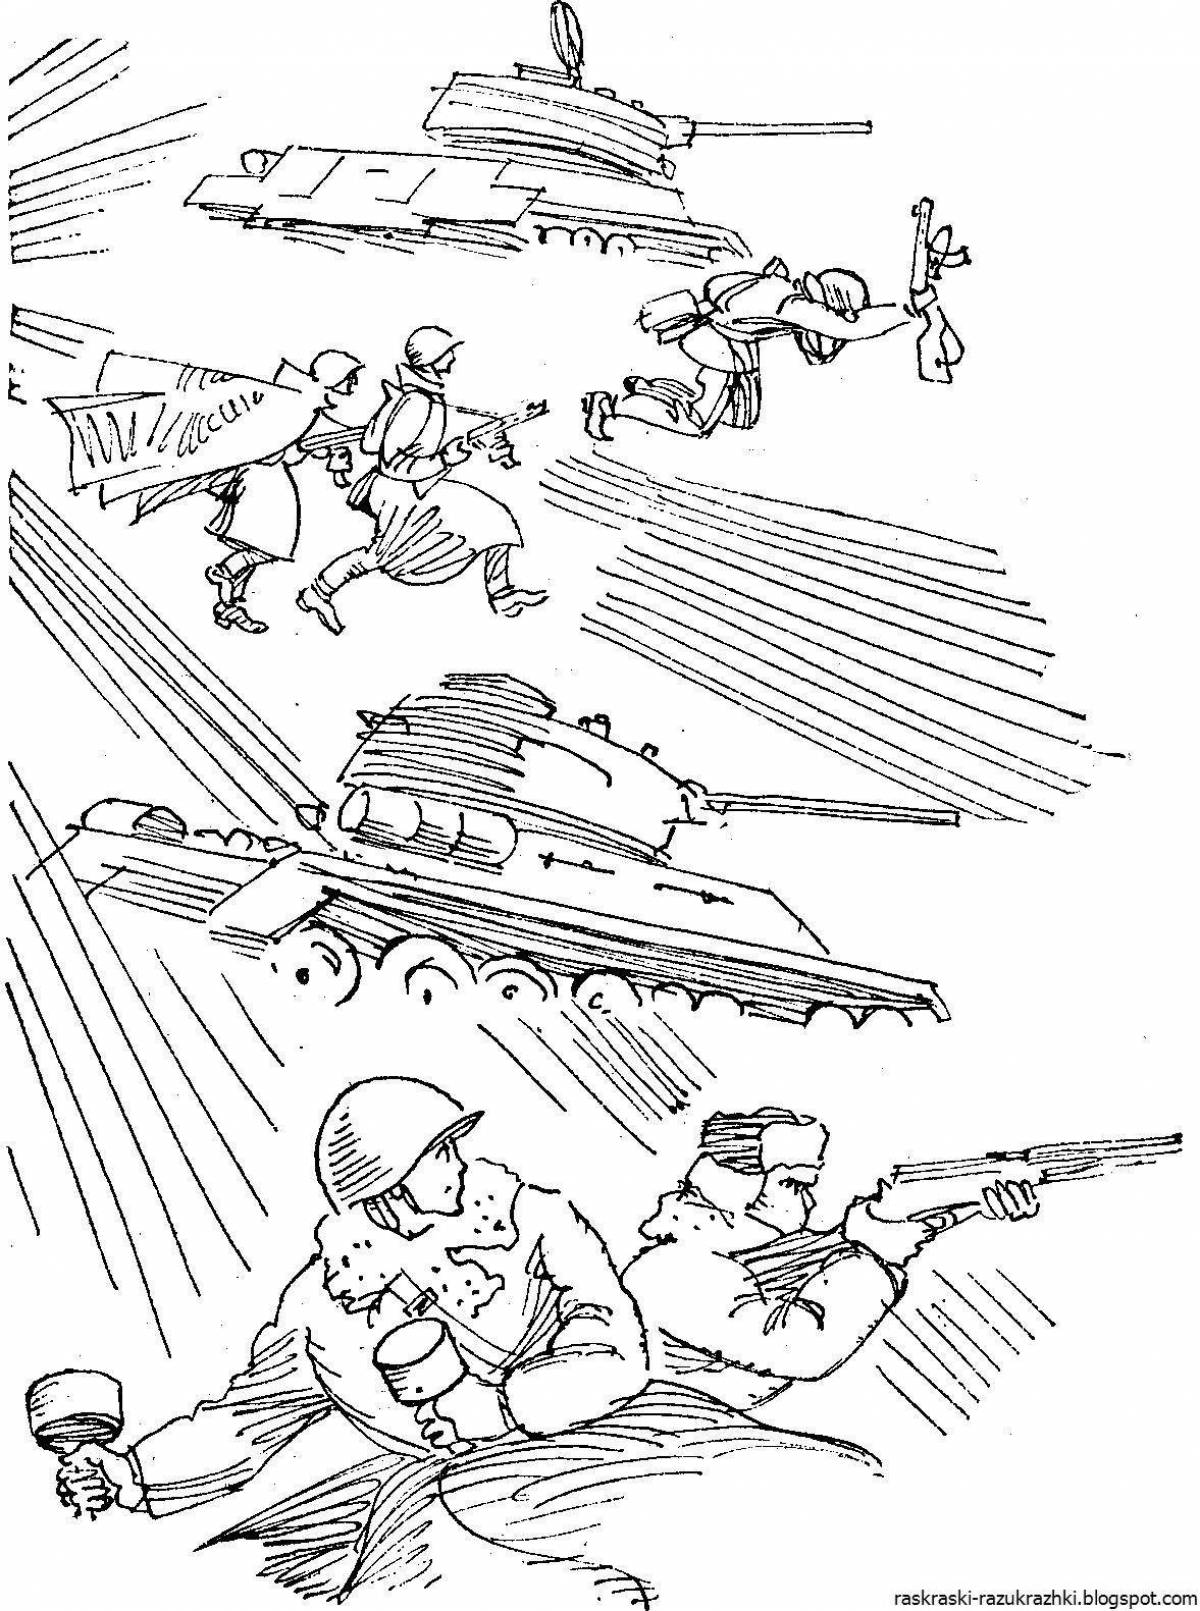 Charming Stalingrad coloring book for kids